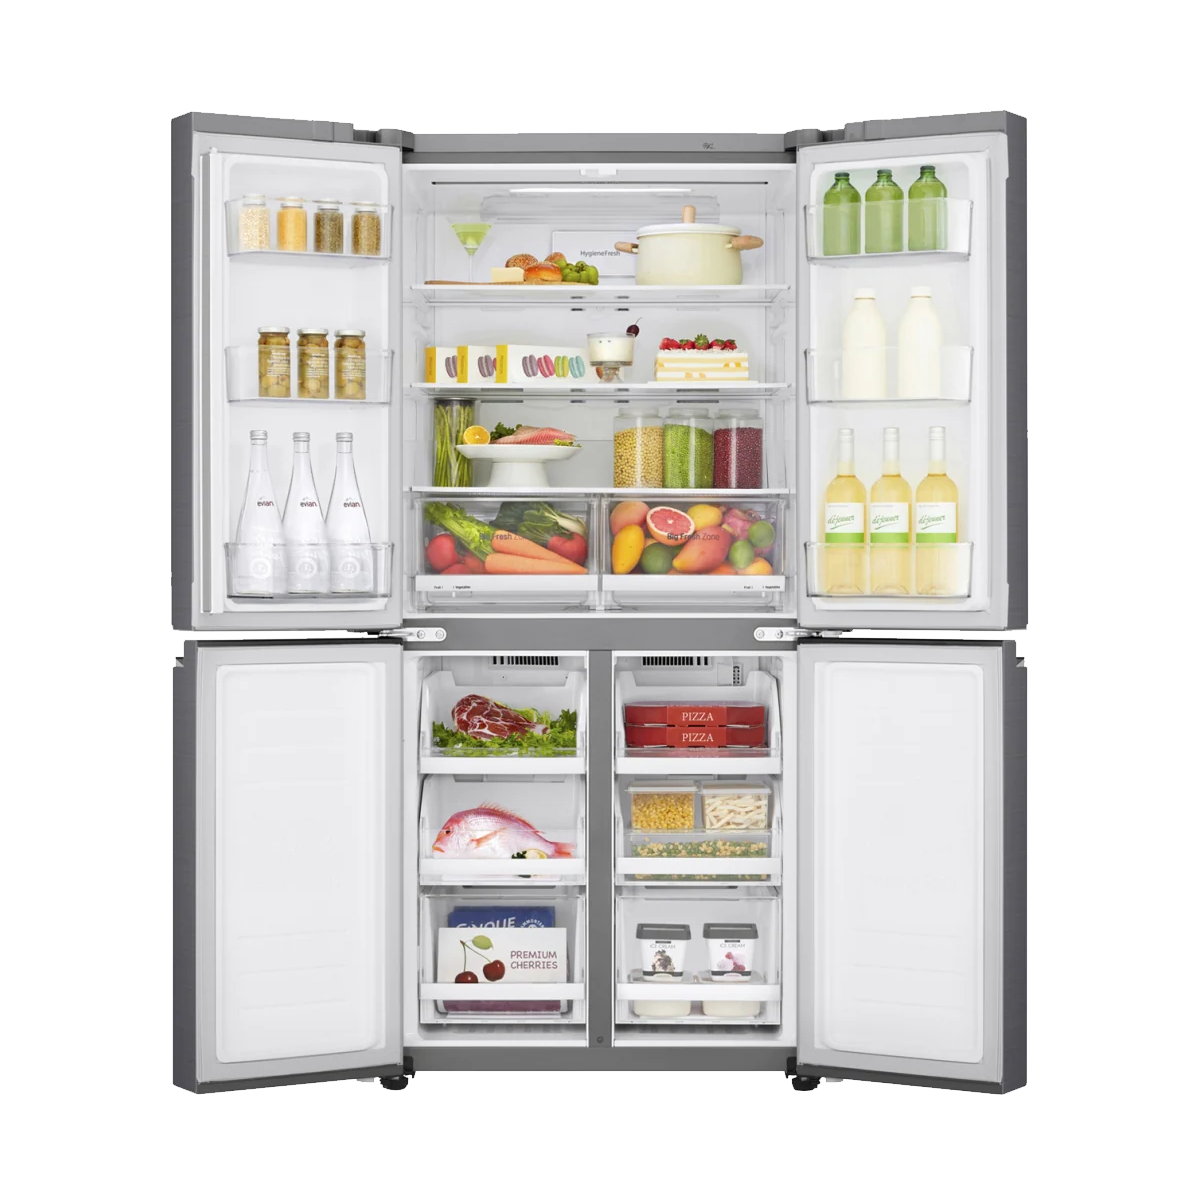 LG 464L Refrigerator with Door Cooling + Technology